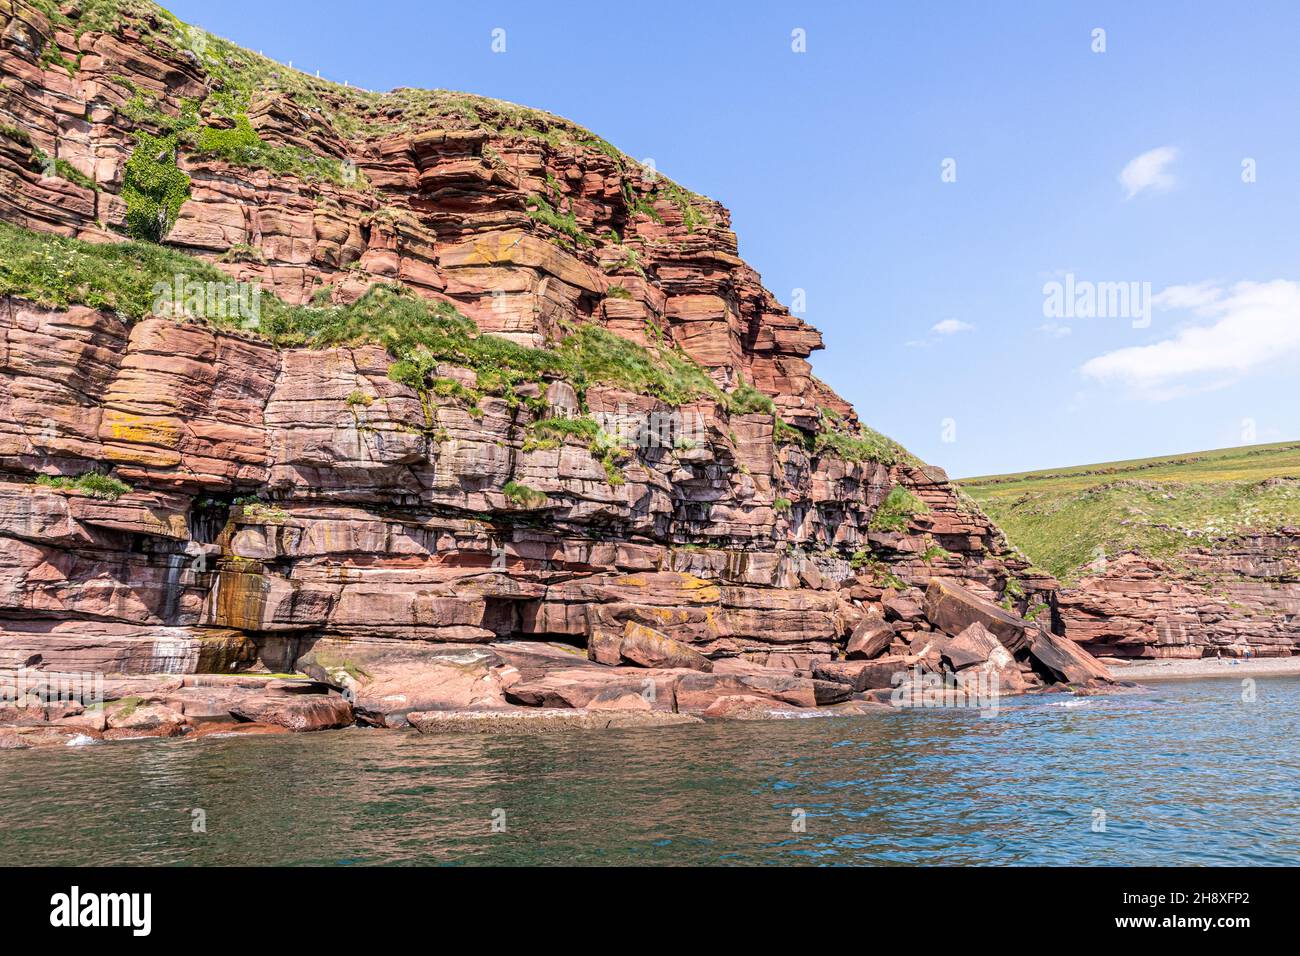 The sandstone cliffs of St Bees Head, Cumbria UK Stock Photo